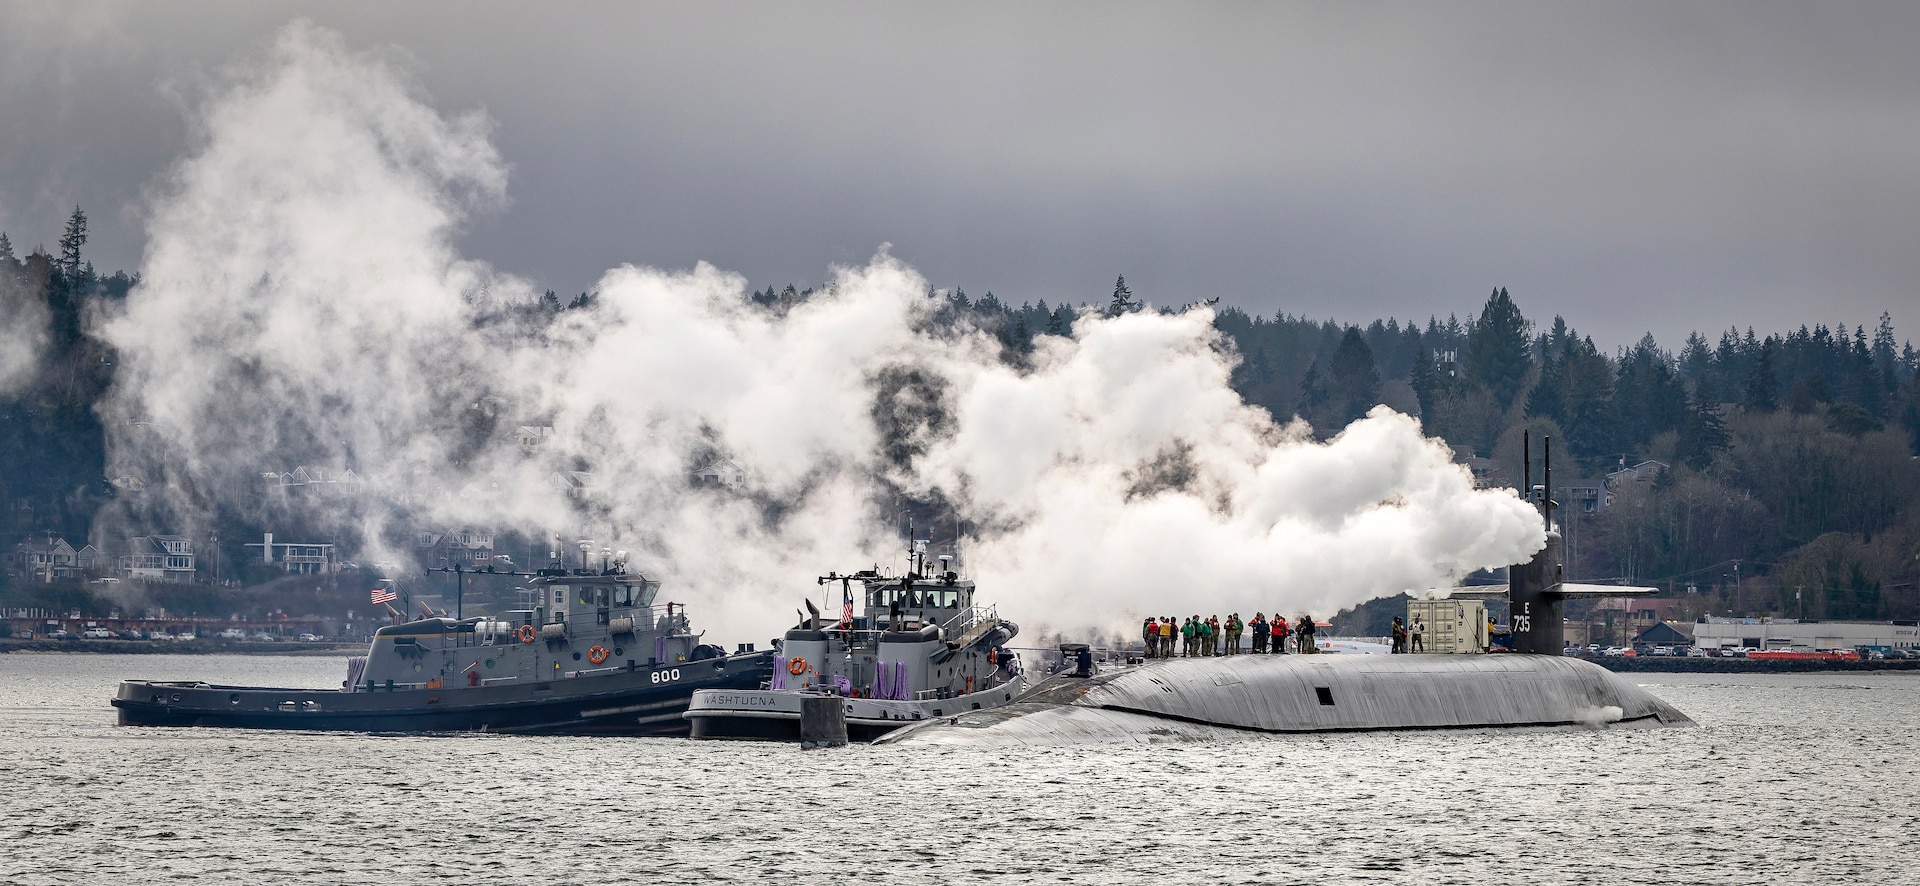 USS Pennsylvania (SSBN 735) is escorted to Pier 5 at Puget Sound Naval Shipyard & Intermediate Maintenance Facility in Bremerton, Washington, March 1, 2023, where it will begin an Extended Refit Period availability. Temporary system installation work began immediately upon arrival. Production work, including regularly scheduled preventative maintenance requirements, modernization and structural repairs, are scheduled to begin later next month. (U.S. Navy photo by Scott Hansen)